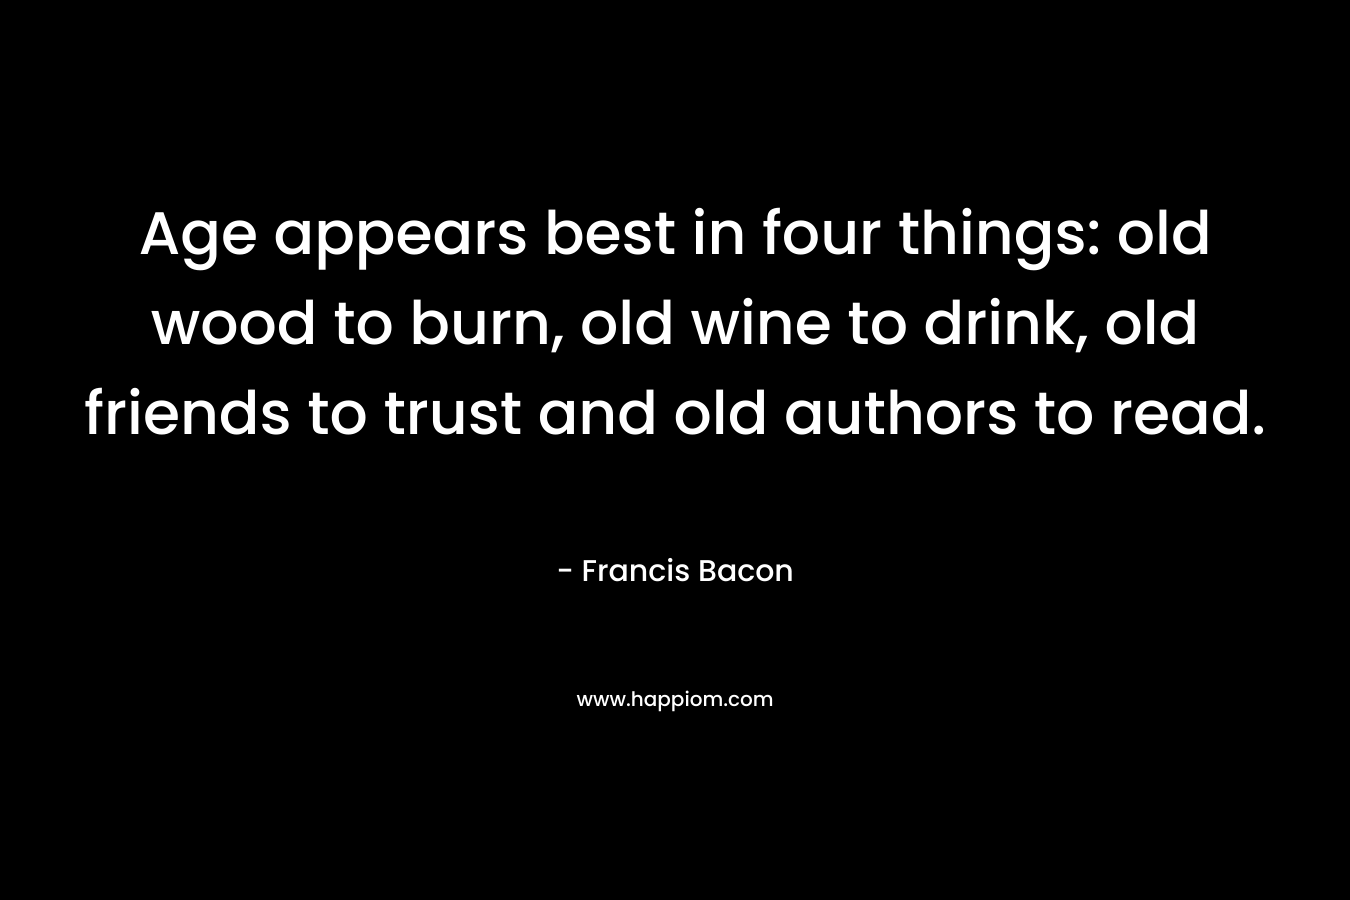 Age appears best in four things: old wood to burn, old wine to drink, old friends to trust and old authors to read.